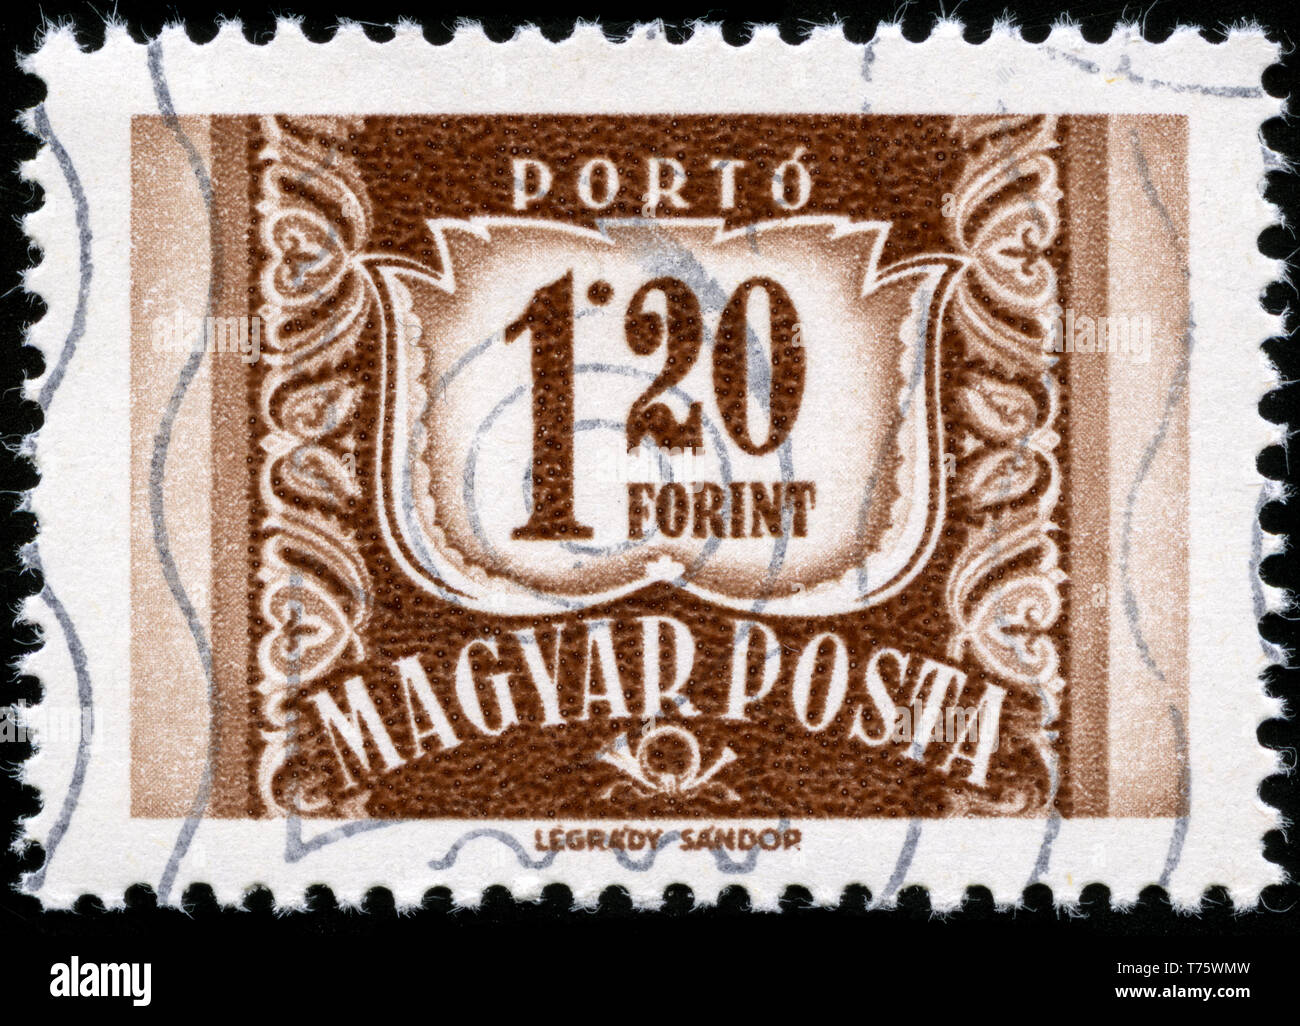 Postage stamp from Hungary in the Postage due series issued in 1965 Stock Photo